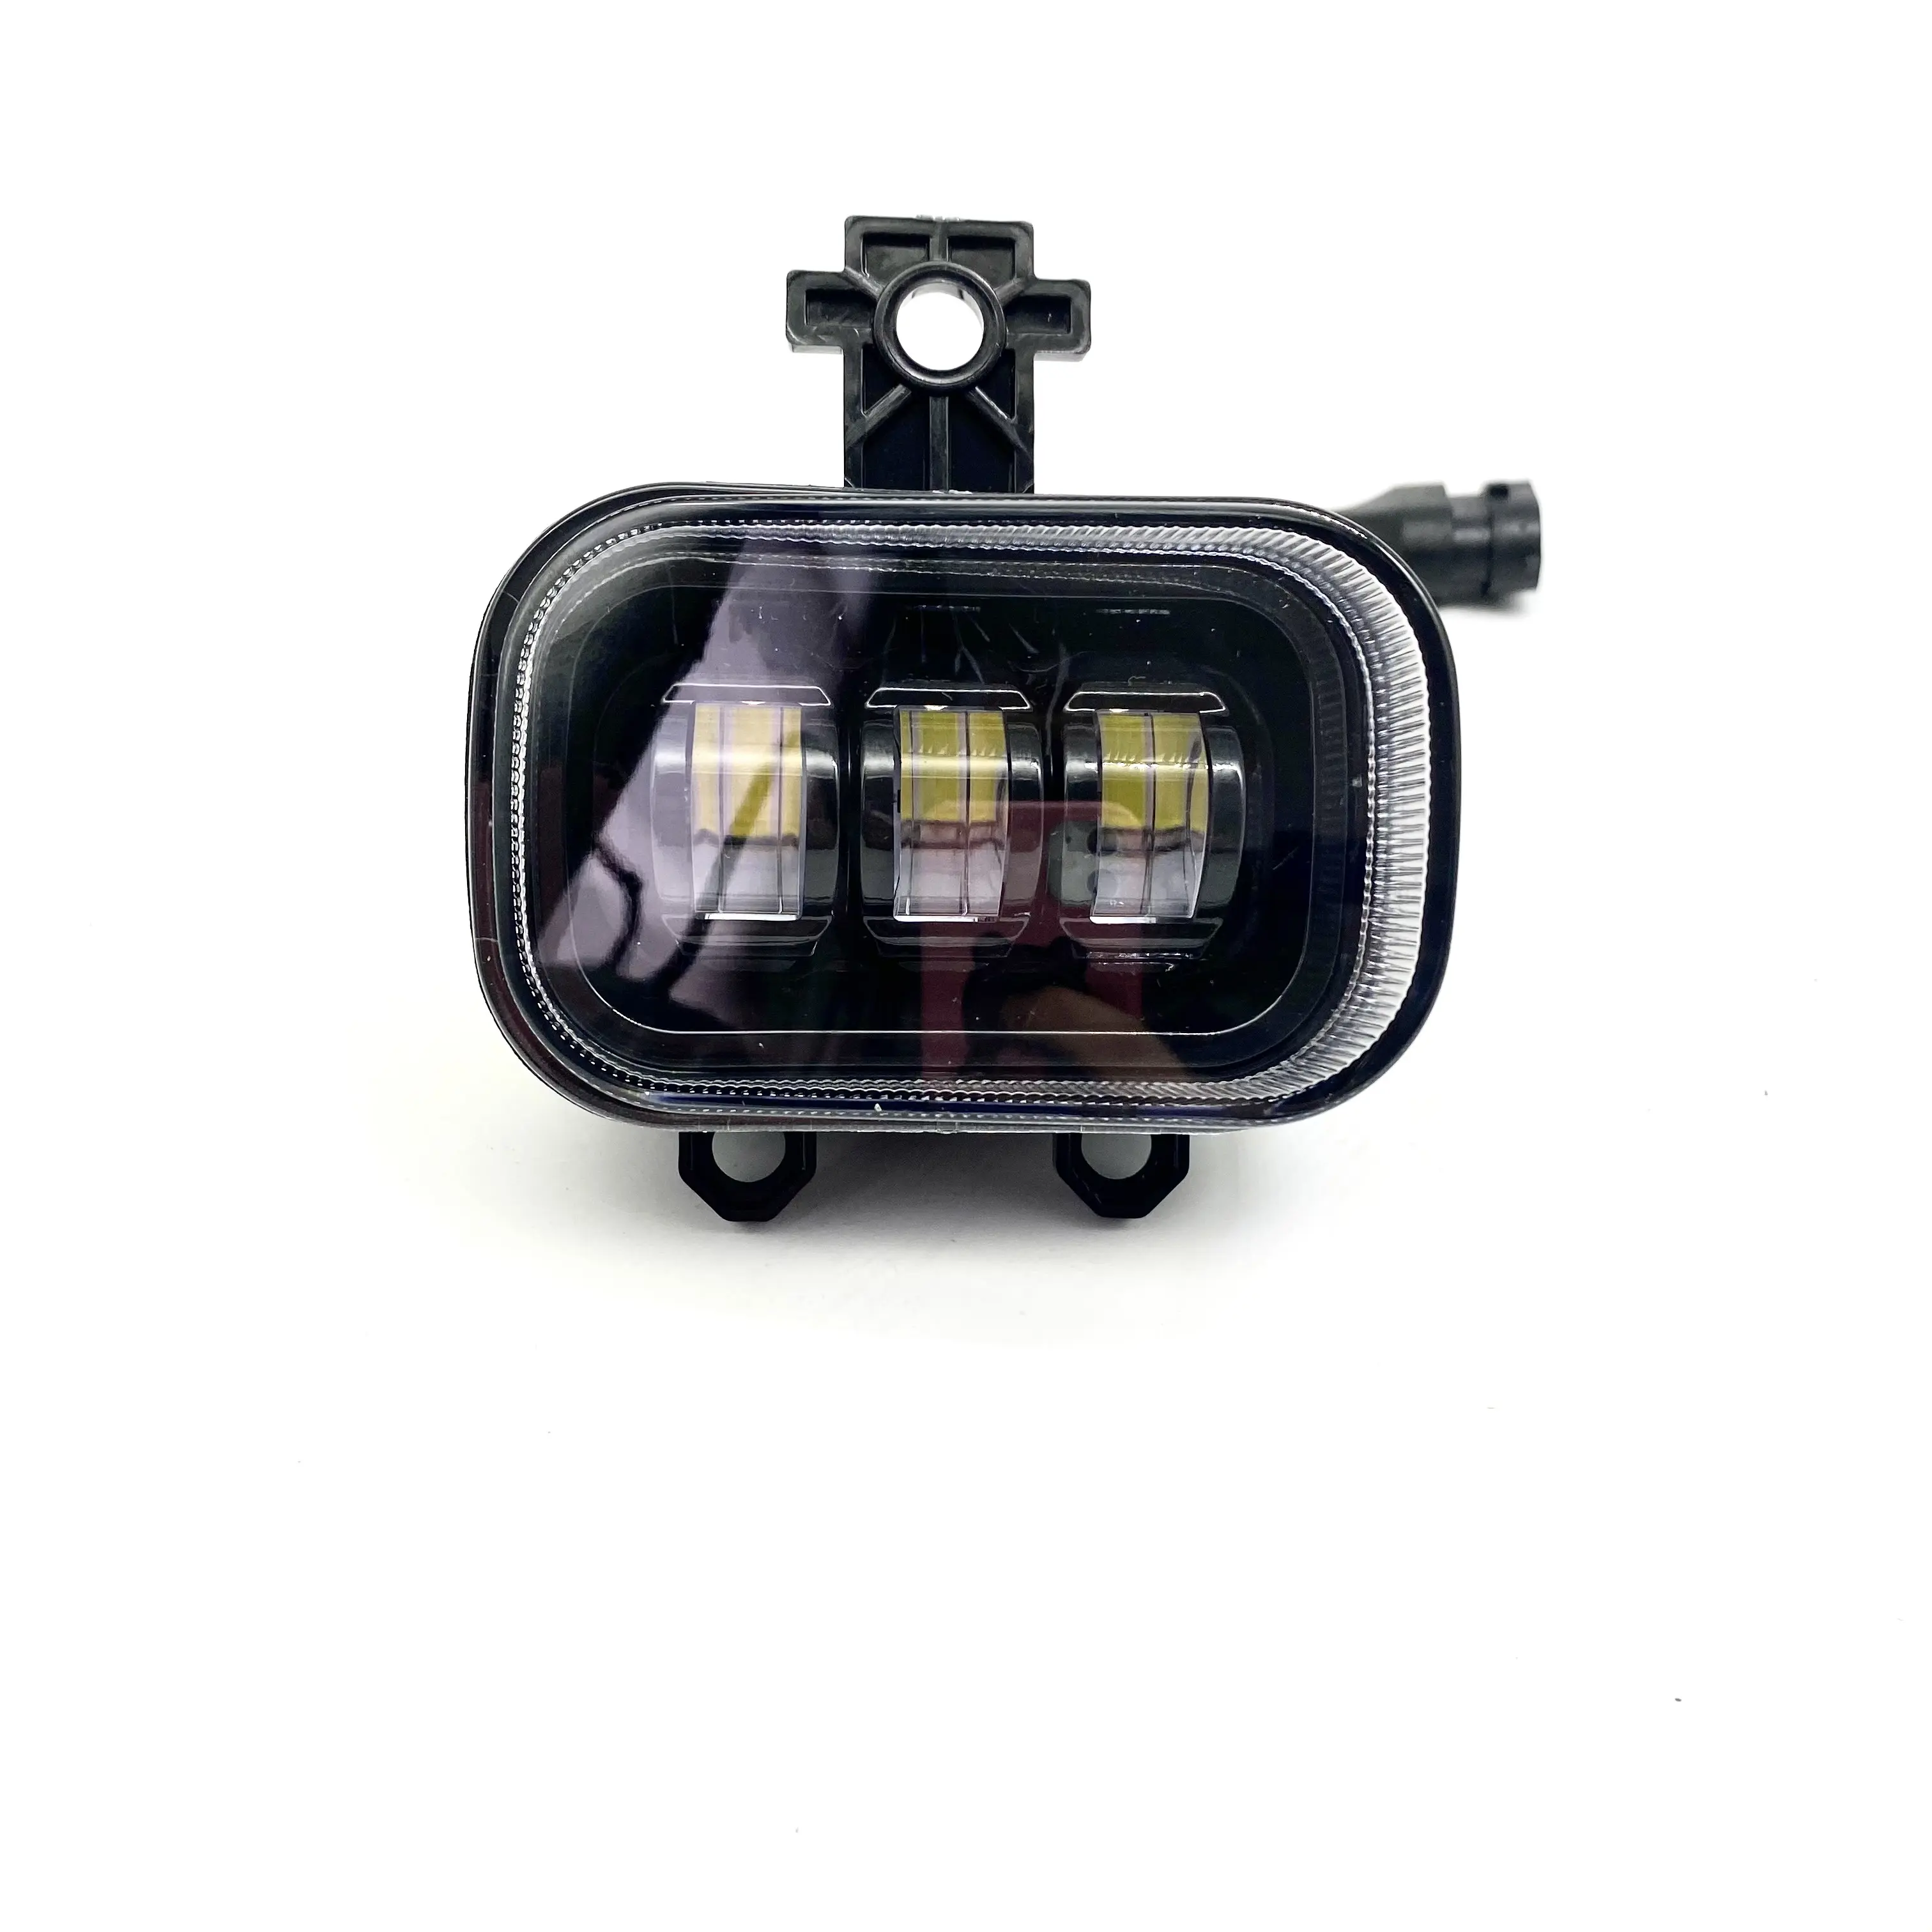 High 35W Car LED FOG Light for nissan patrol Y62 Brightness Safety Auto Offroad Round Worklight waterproof LP68